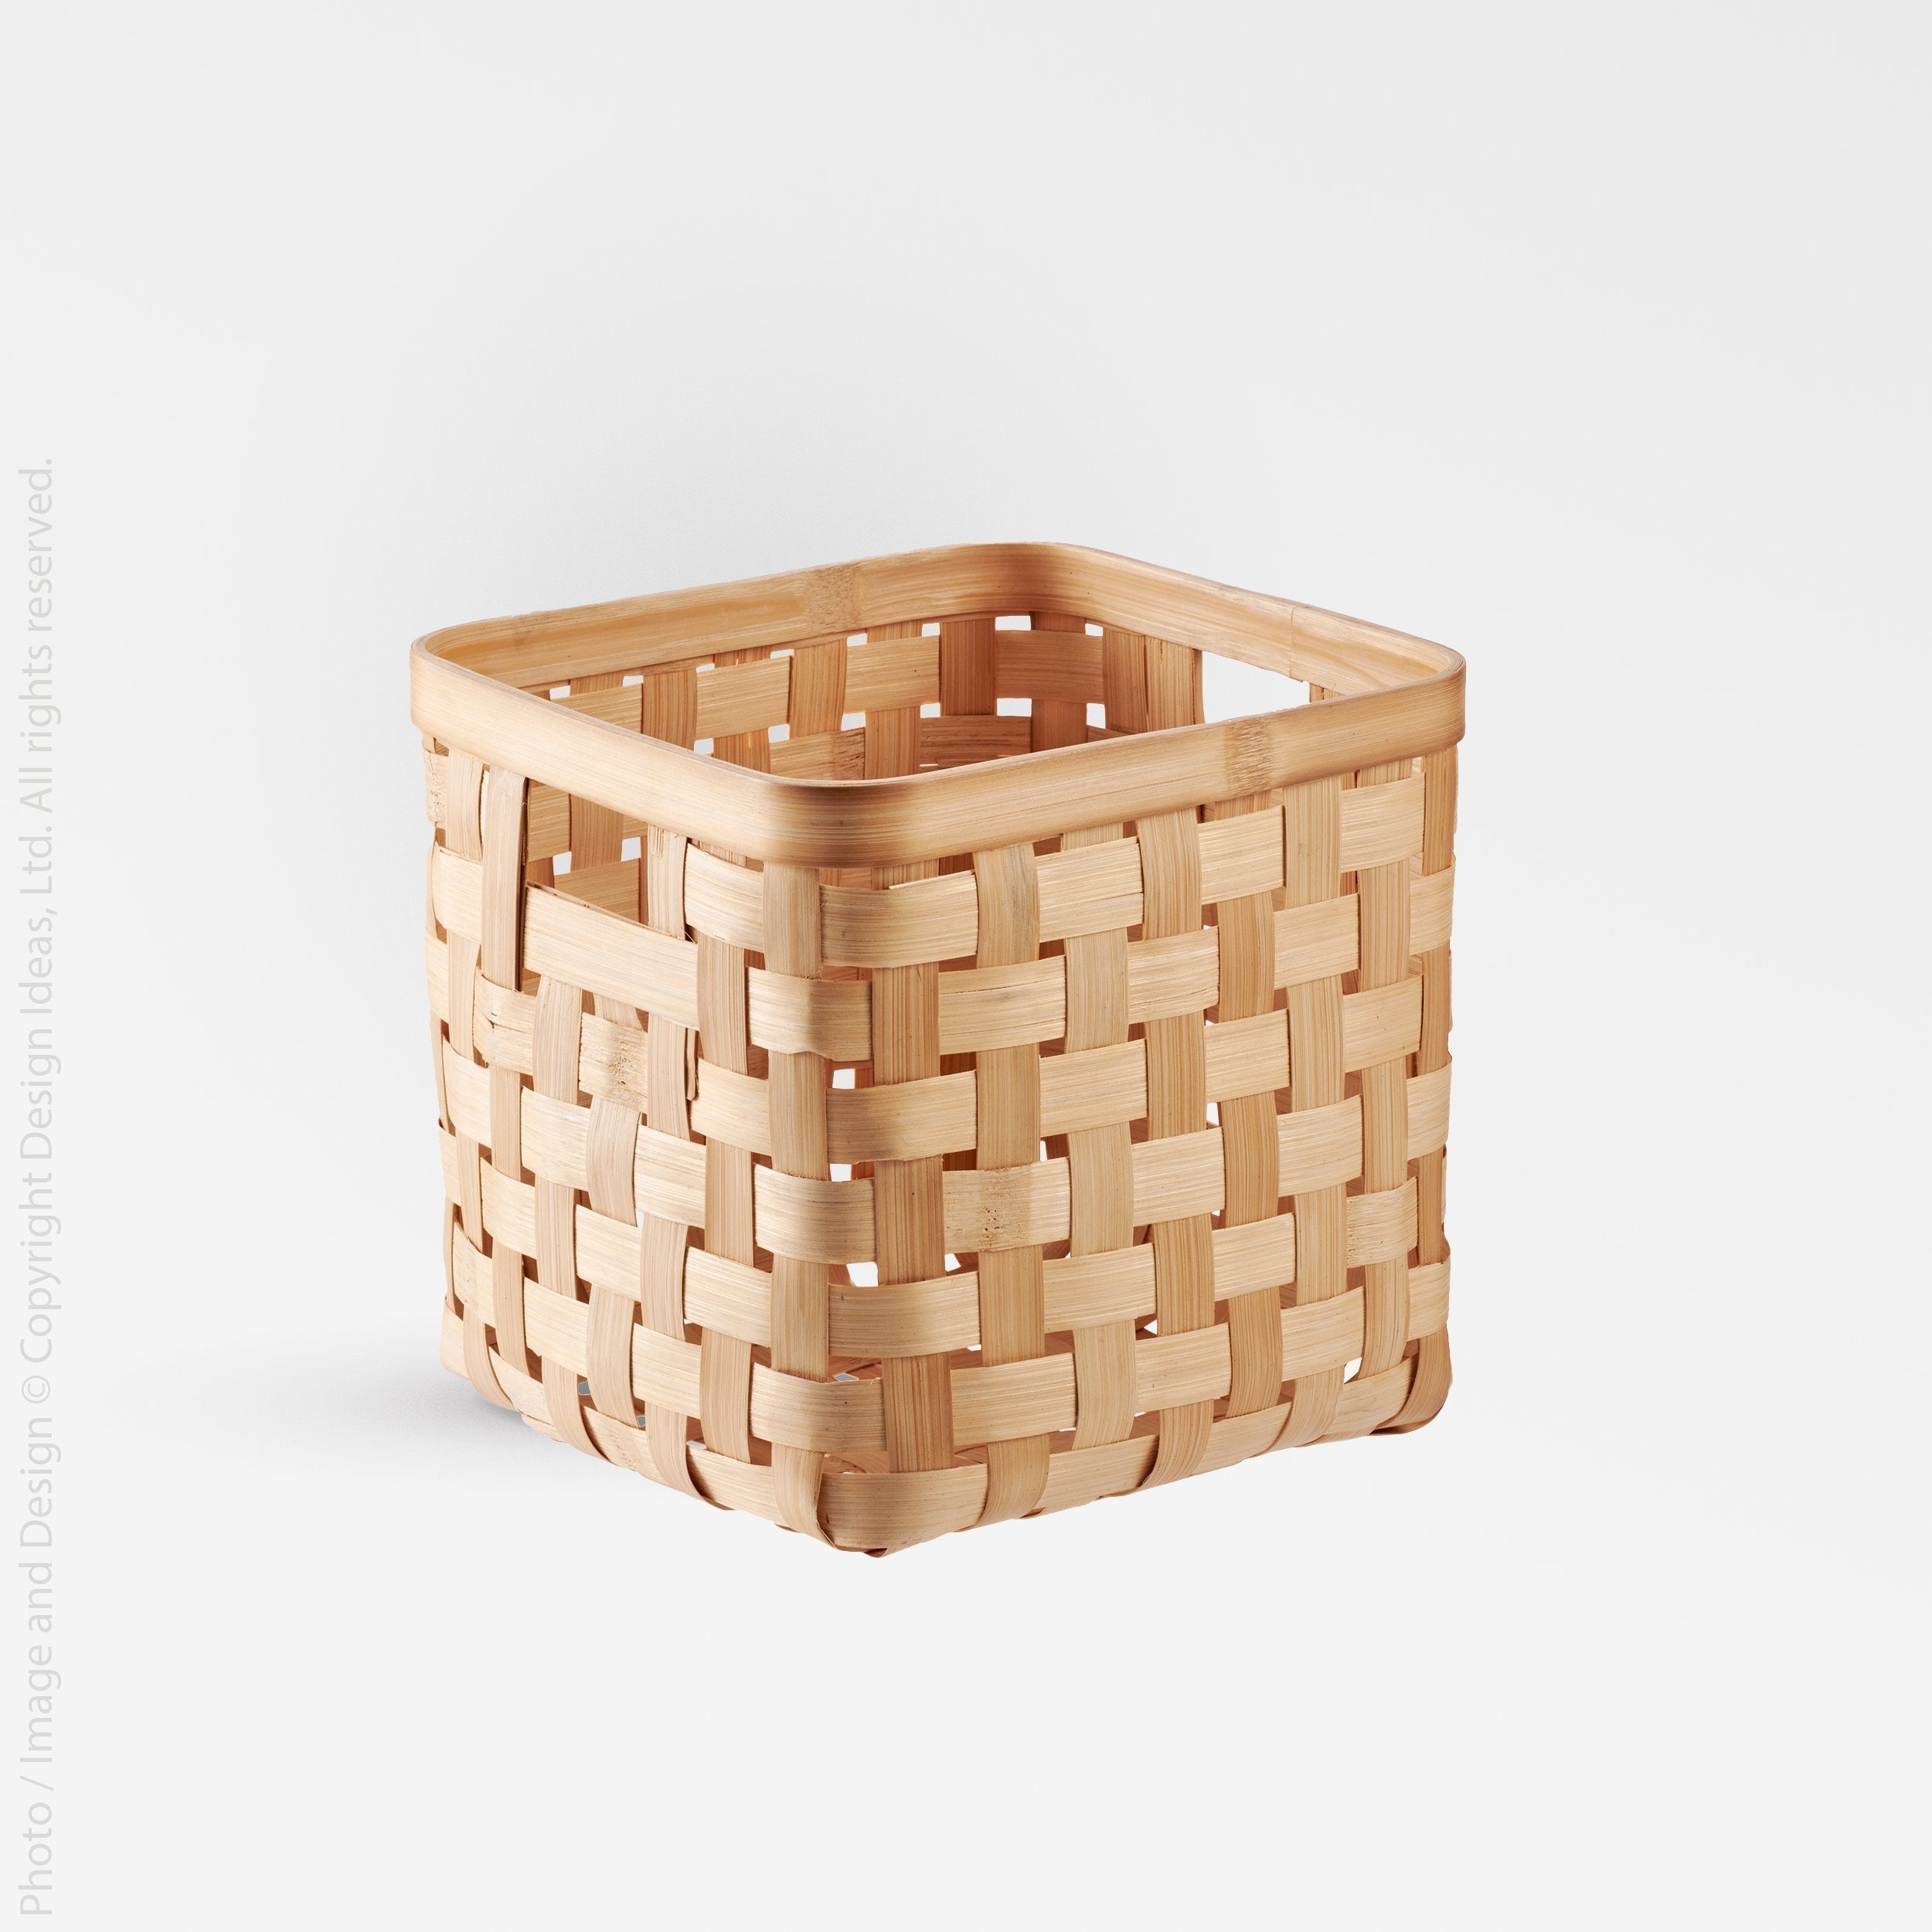 Bahmi™ storage cube (11x11x11in) - Natural | Image 1 | Premium Bin from the Bahmi collection | made with Bamboo for long lasting use | texxture